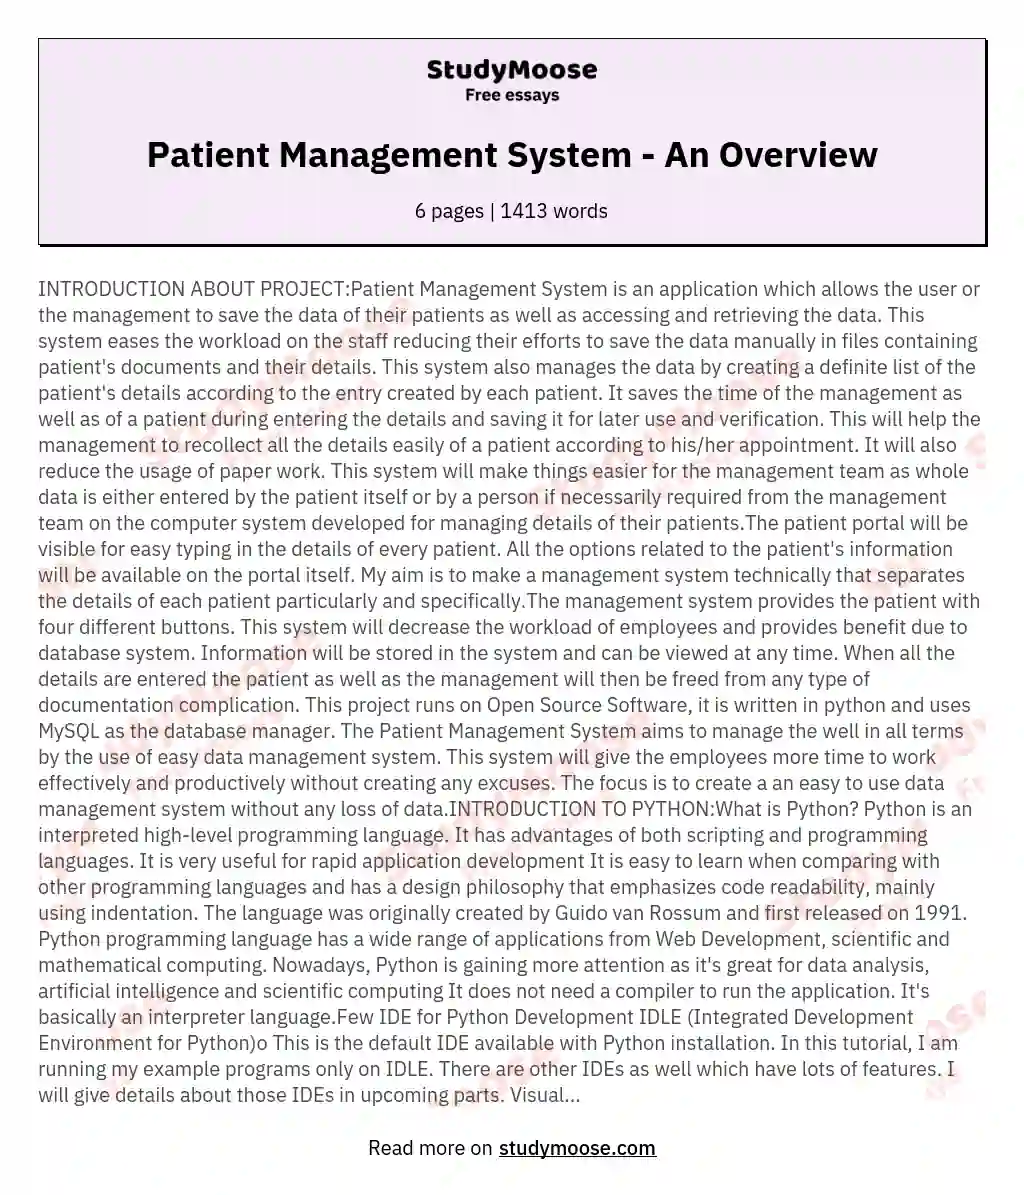 INTRODUCTION ABOUT PROJECTPatient Management System is an application which allows the user